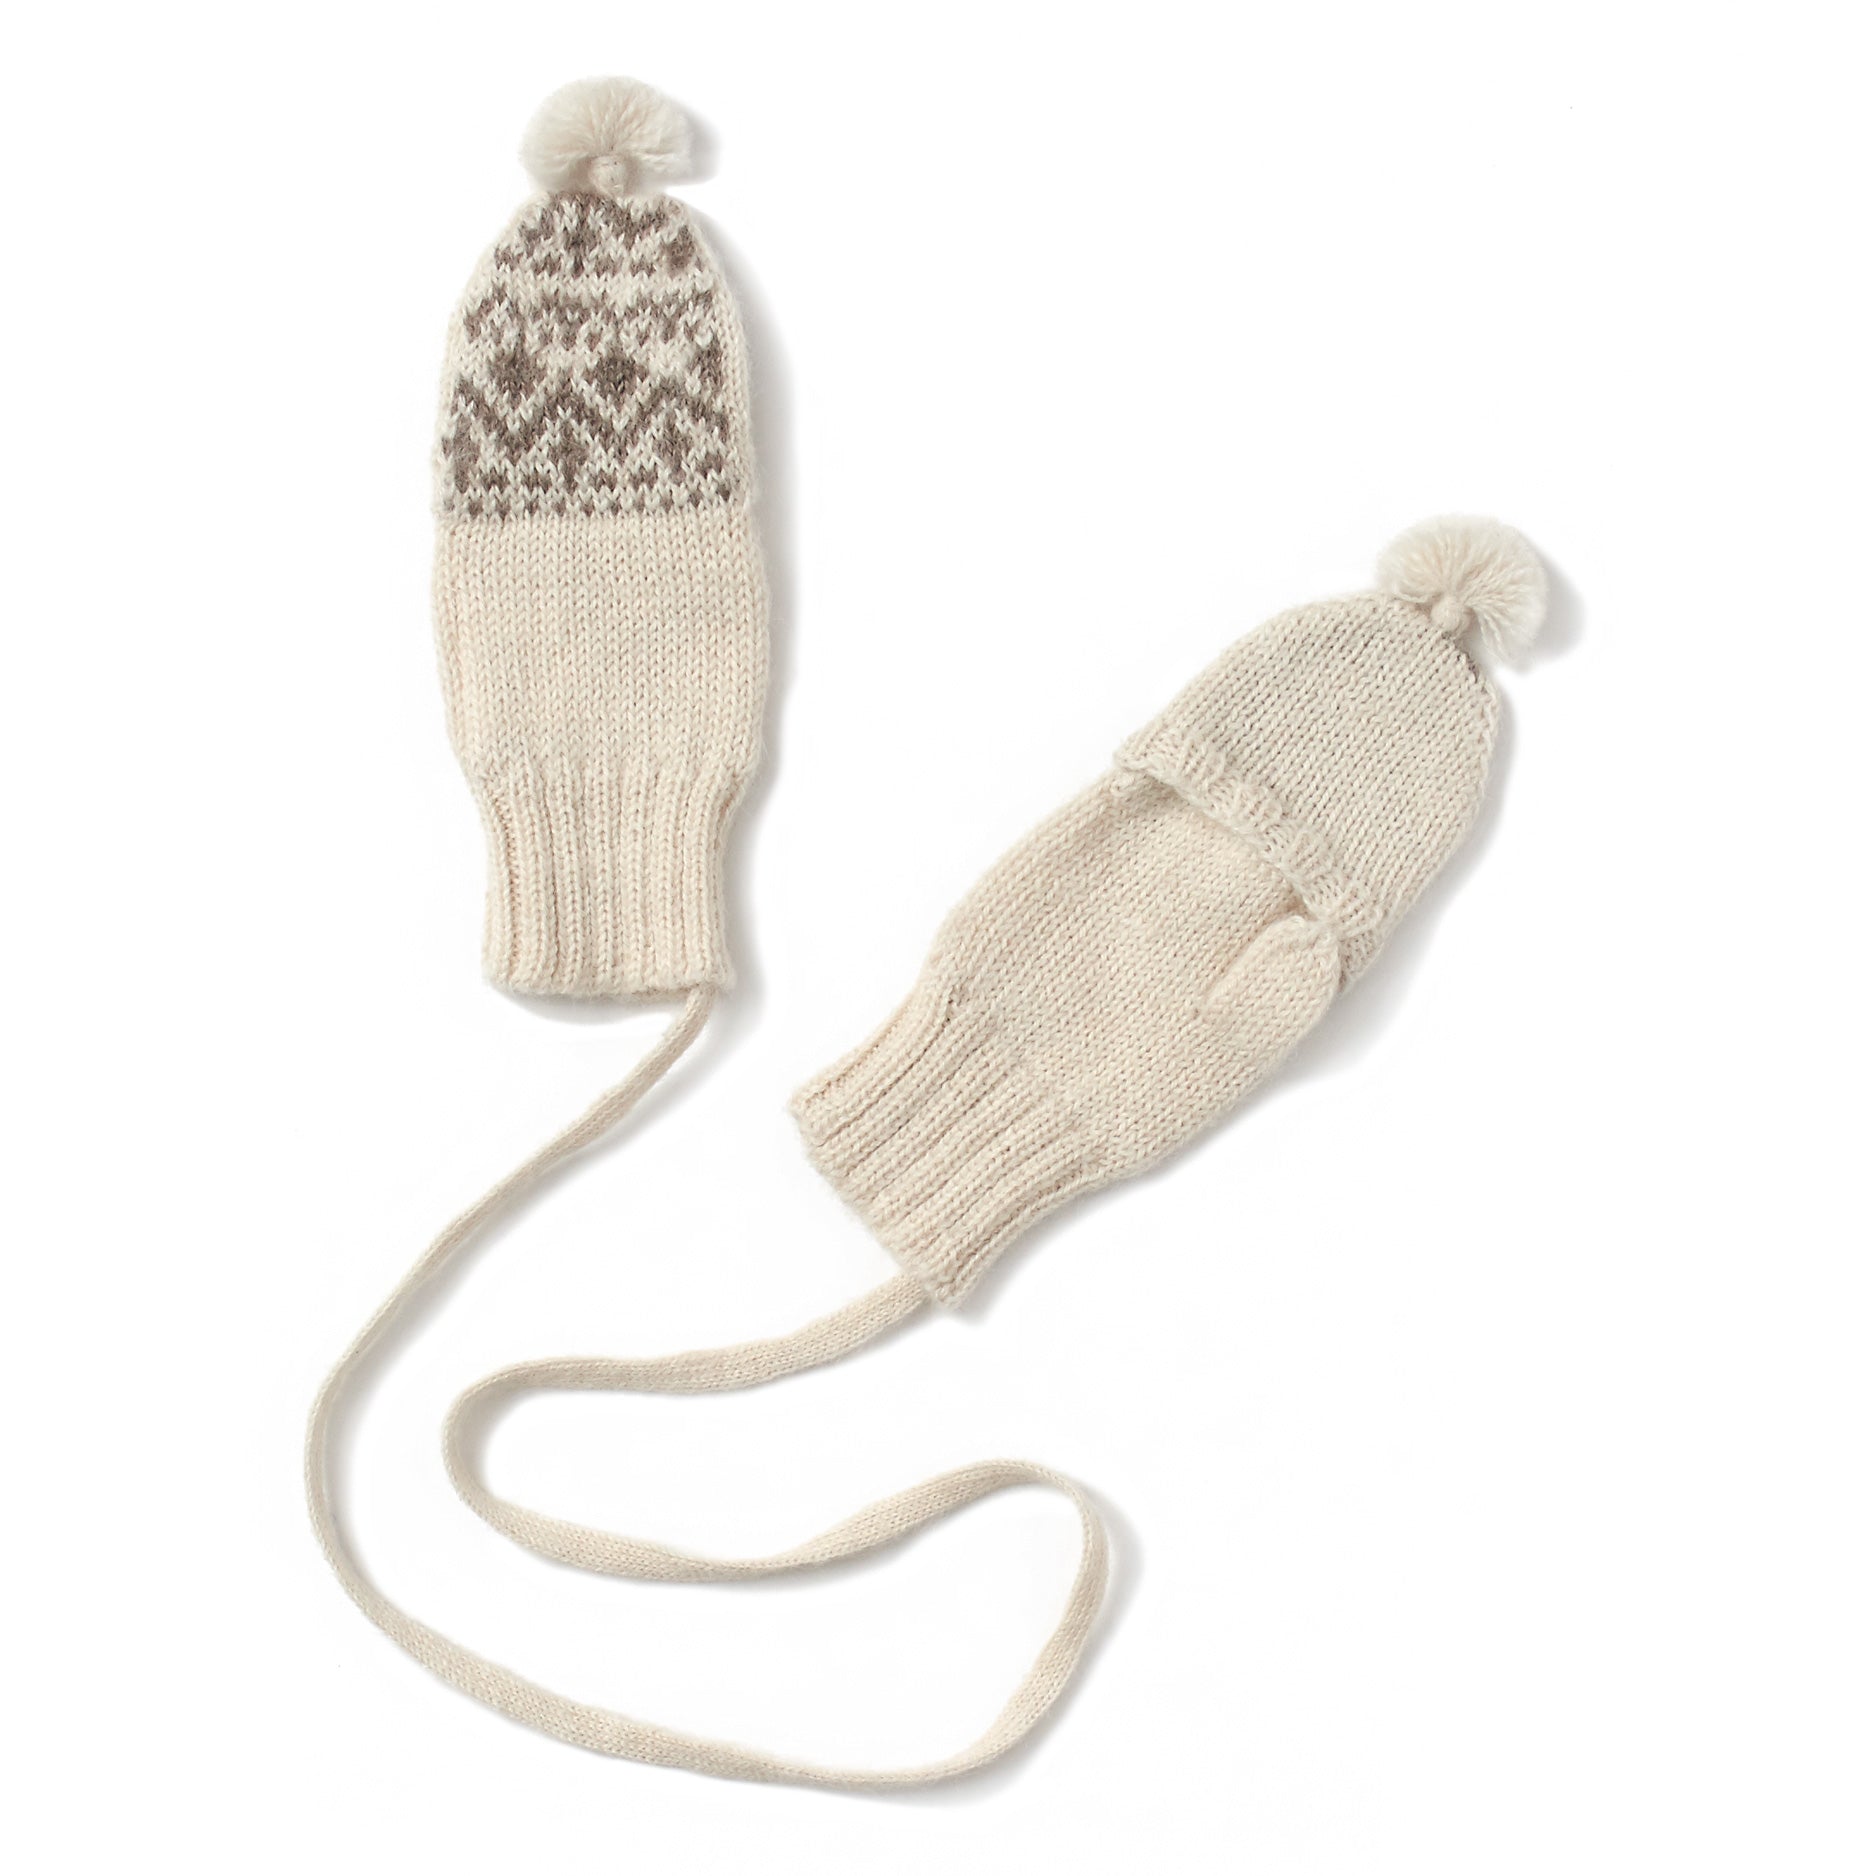 soft white mittens knitted in fair isle pattern, string attached together, tassel on top, fingerless with flap cover, handmade in 100% baby alpaca